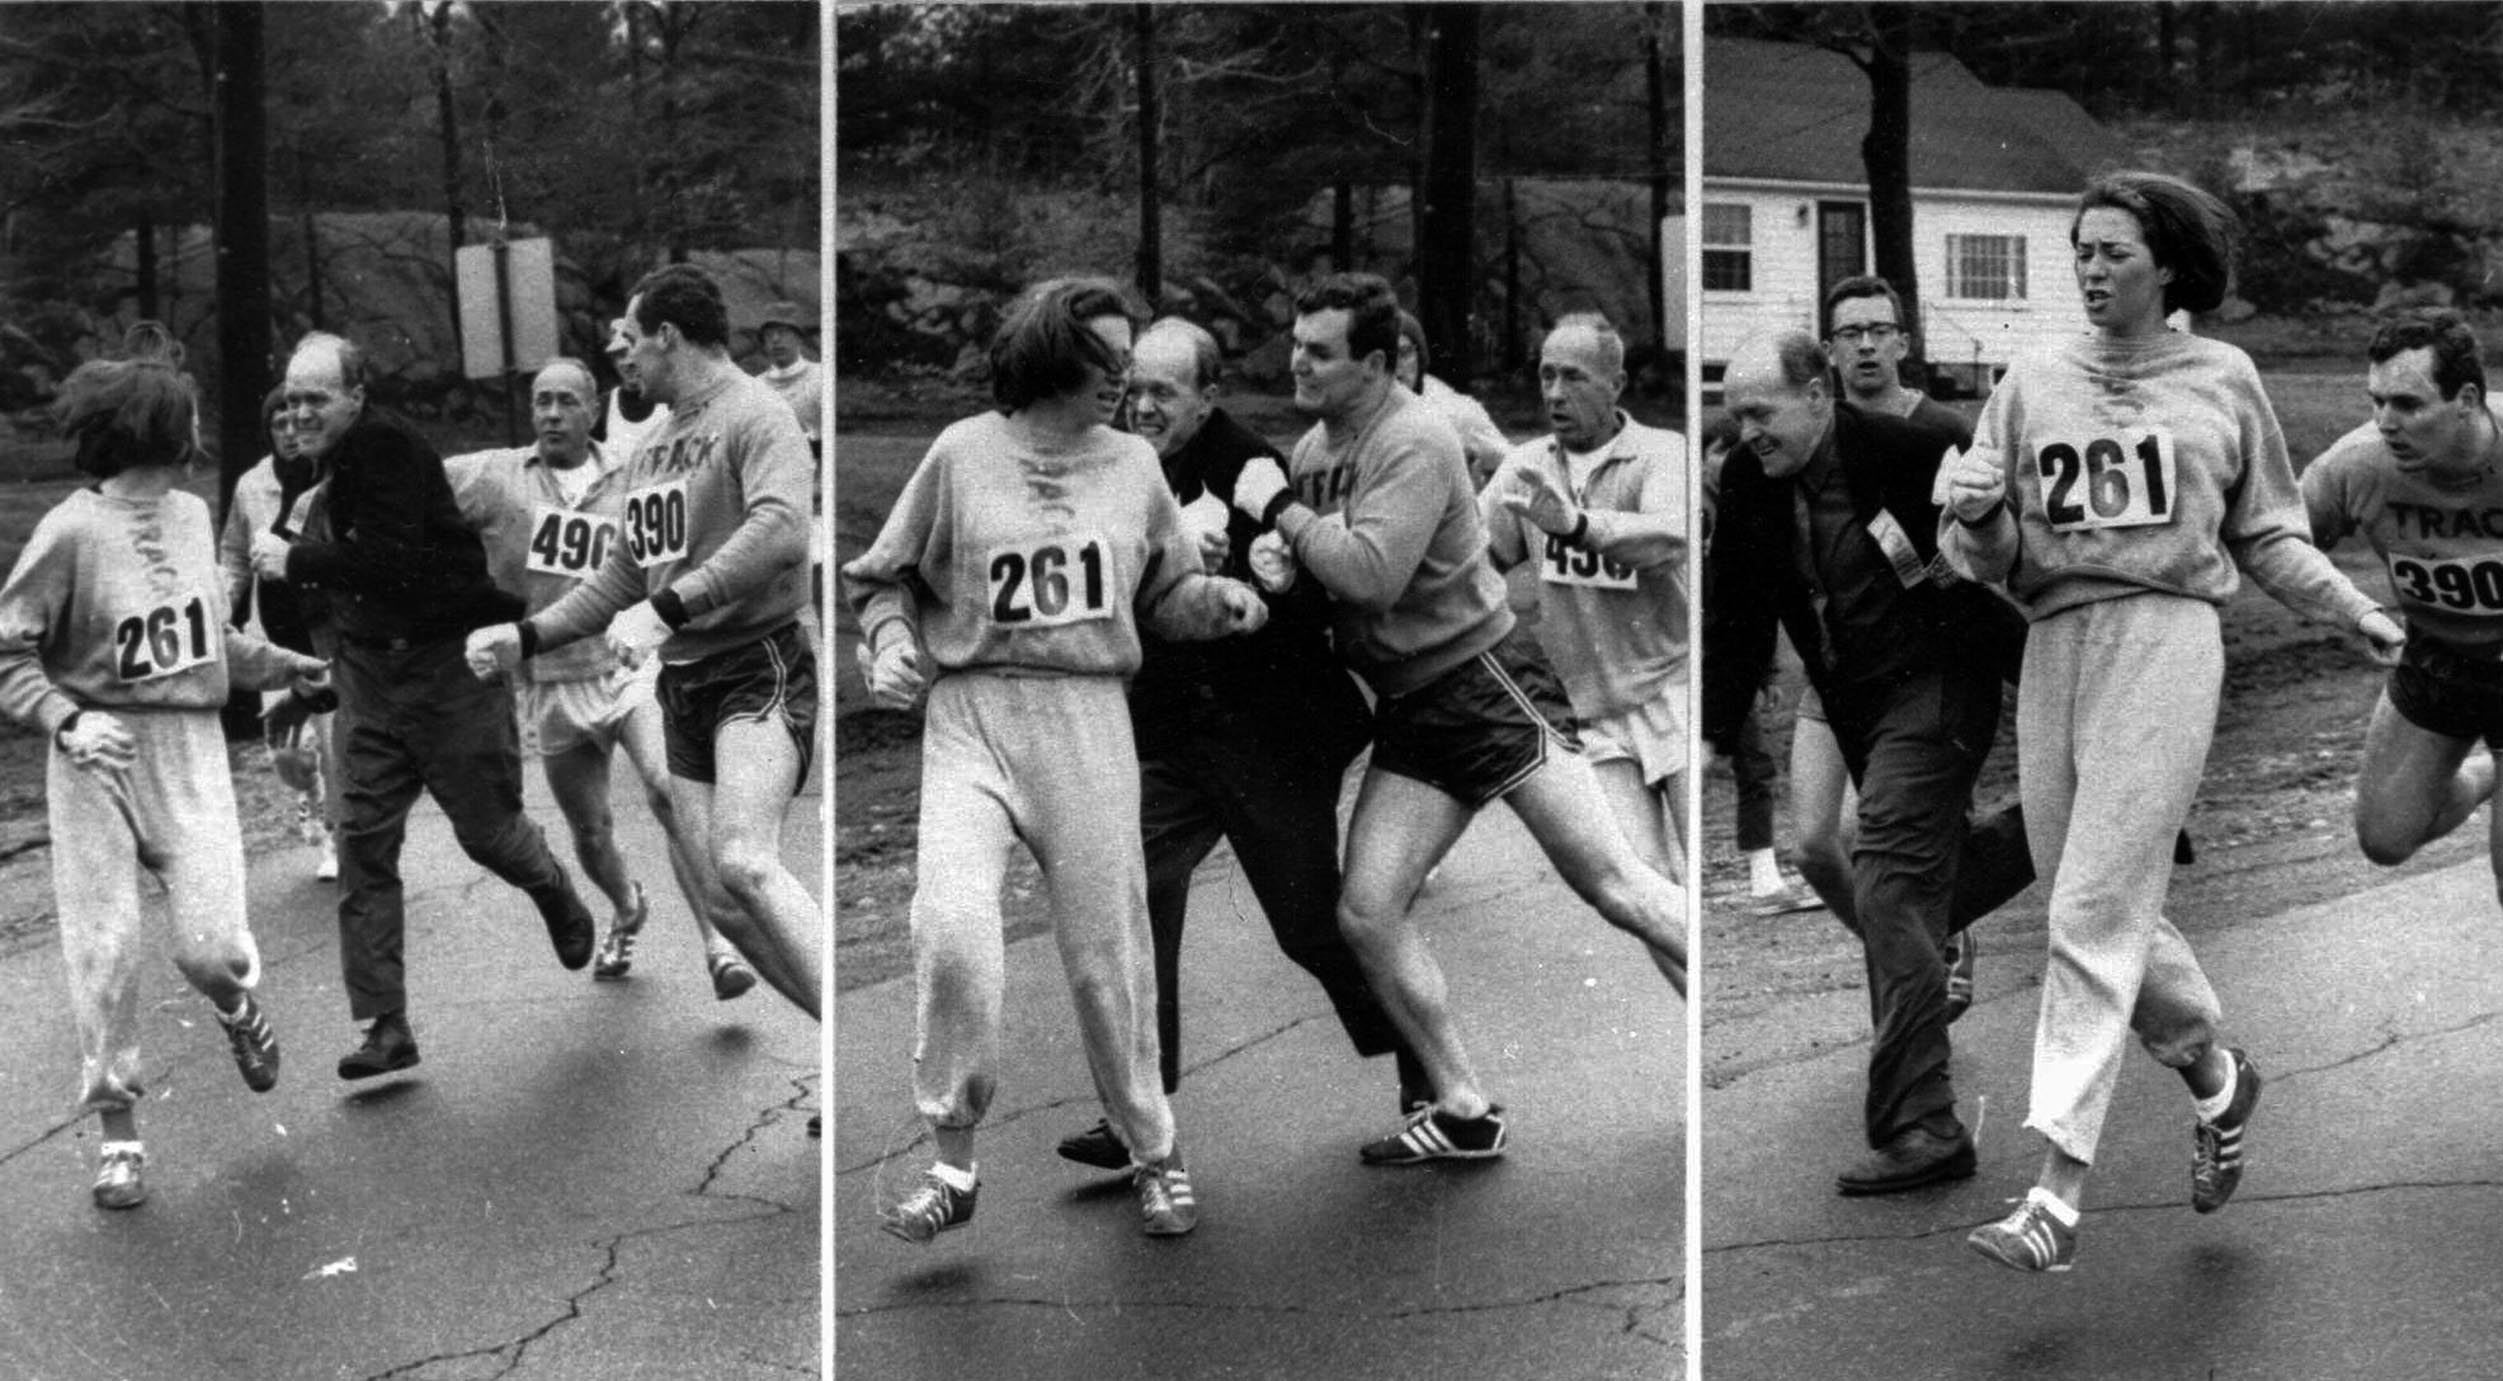 The legendary moment that captured Switzer about to be pushed out of the 1967 Boston Marathon. Photo Courtesy: Boston Herald